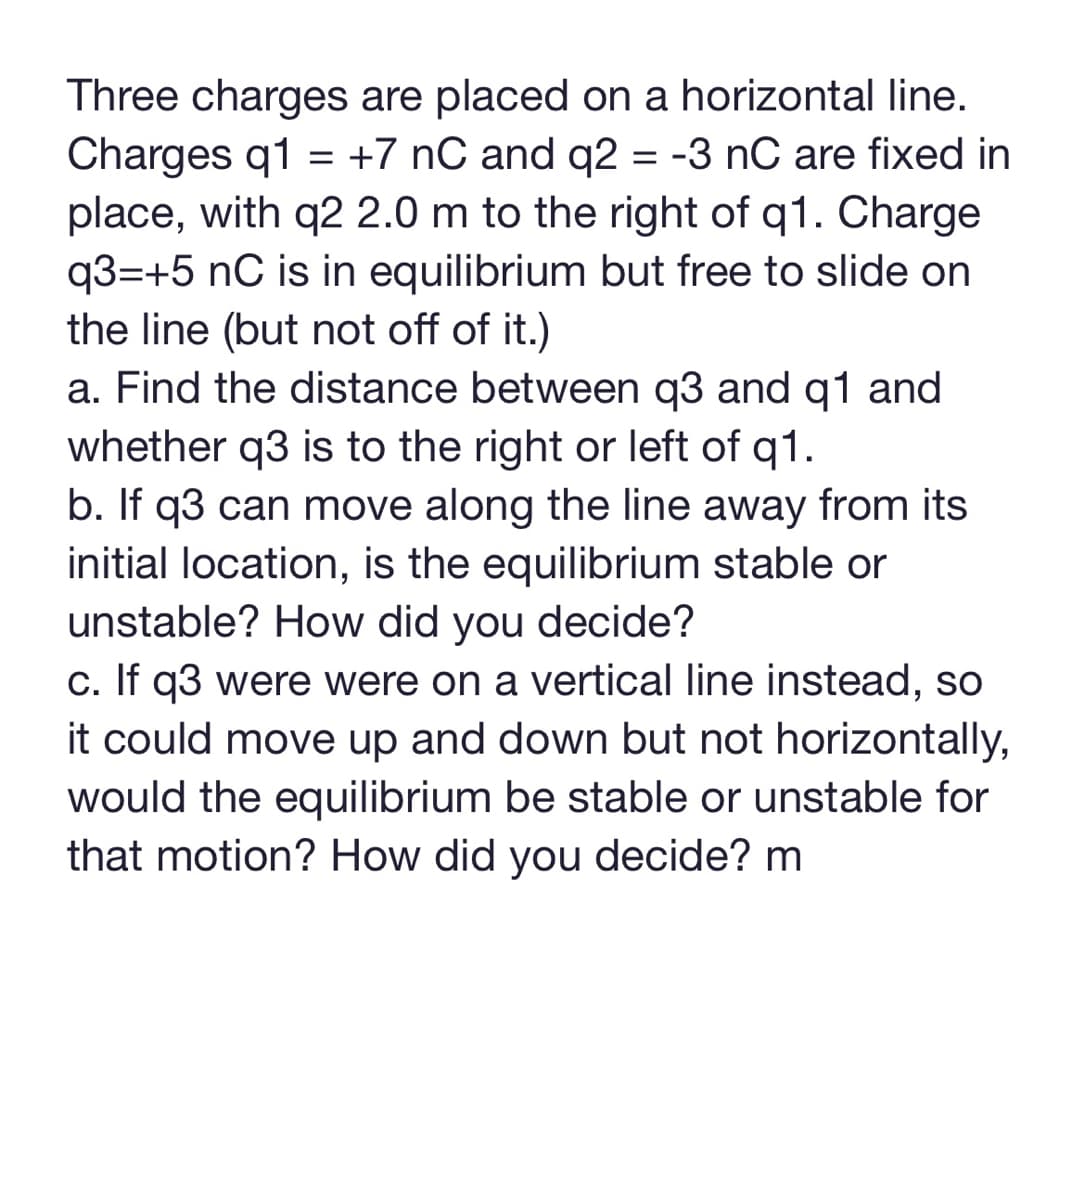 Three charges are placed on a horizontal line.
Charges q1 = +7 nC and q2 = -3 nC are fixed in
place, with q2 2.0 m to the right of q1. Charge
q3=+5 nC is in equilibrium but free to slide on
the line (but not off of it.)
a. Find the distance between q3 and q1 and
whether q3 is to the right or left of q1.
b. If q3 can move along the line away from its
initial location, is the equilibrium stable or
unstable? How did you decide?
c. If q3 were were on a vertical line instead, so
it could move up and down but not horizontally,
would the equilibrium be stable or unstable for
that motion? How did you decide? m